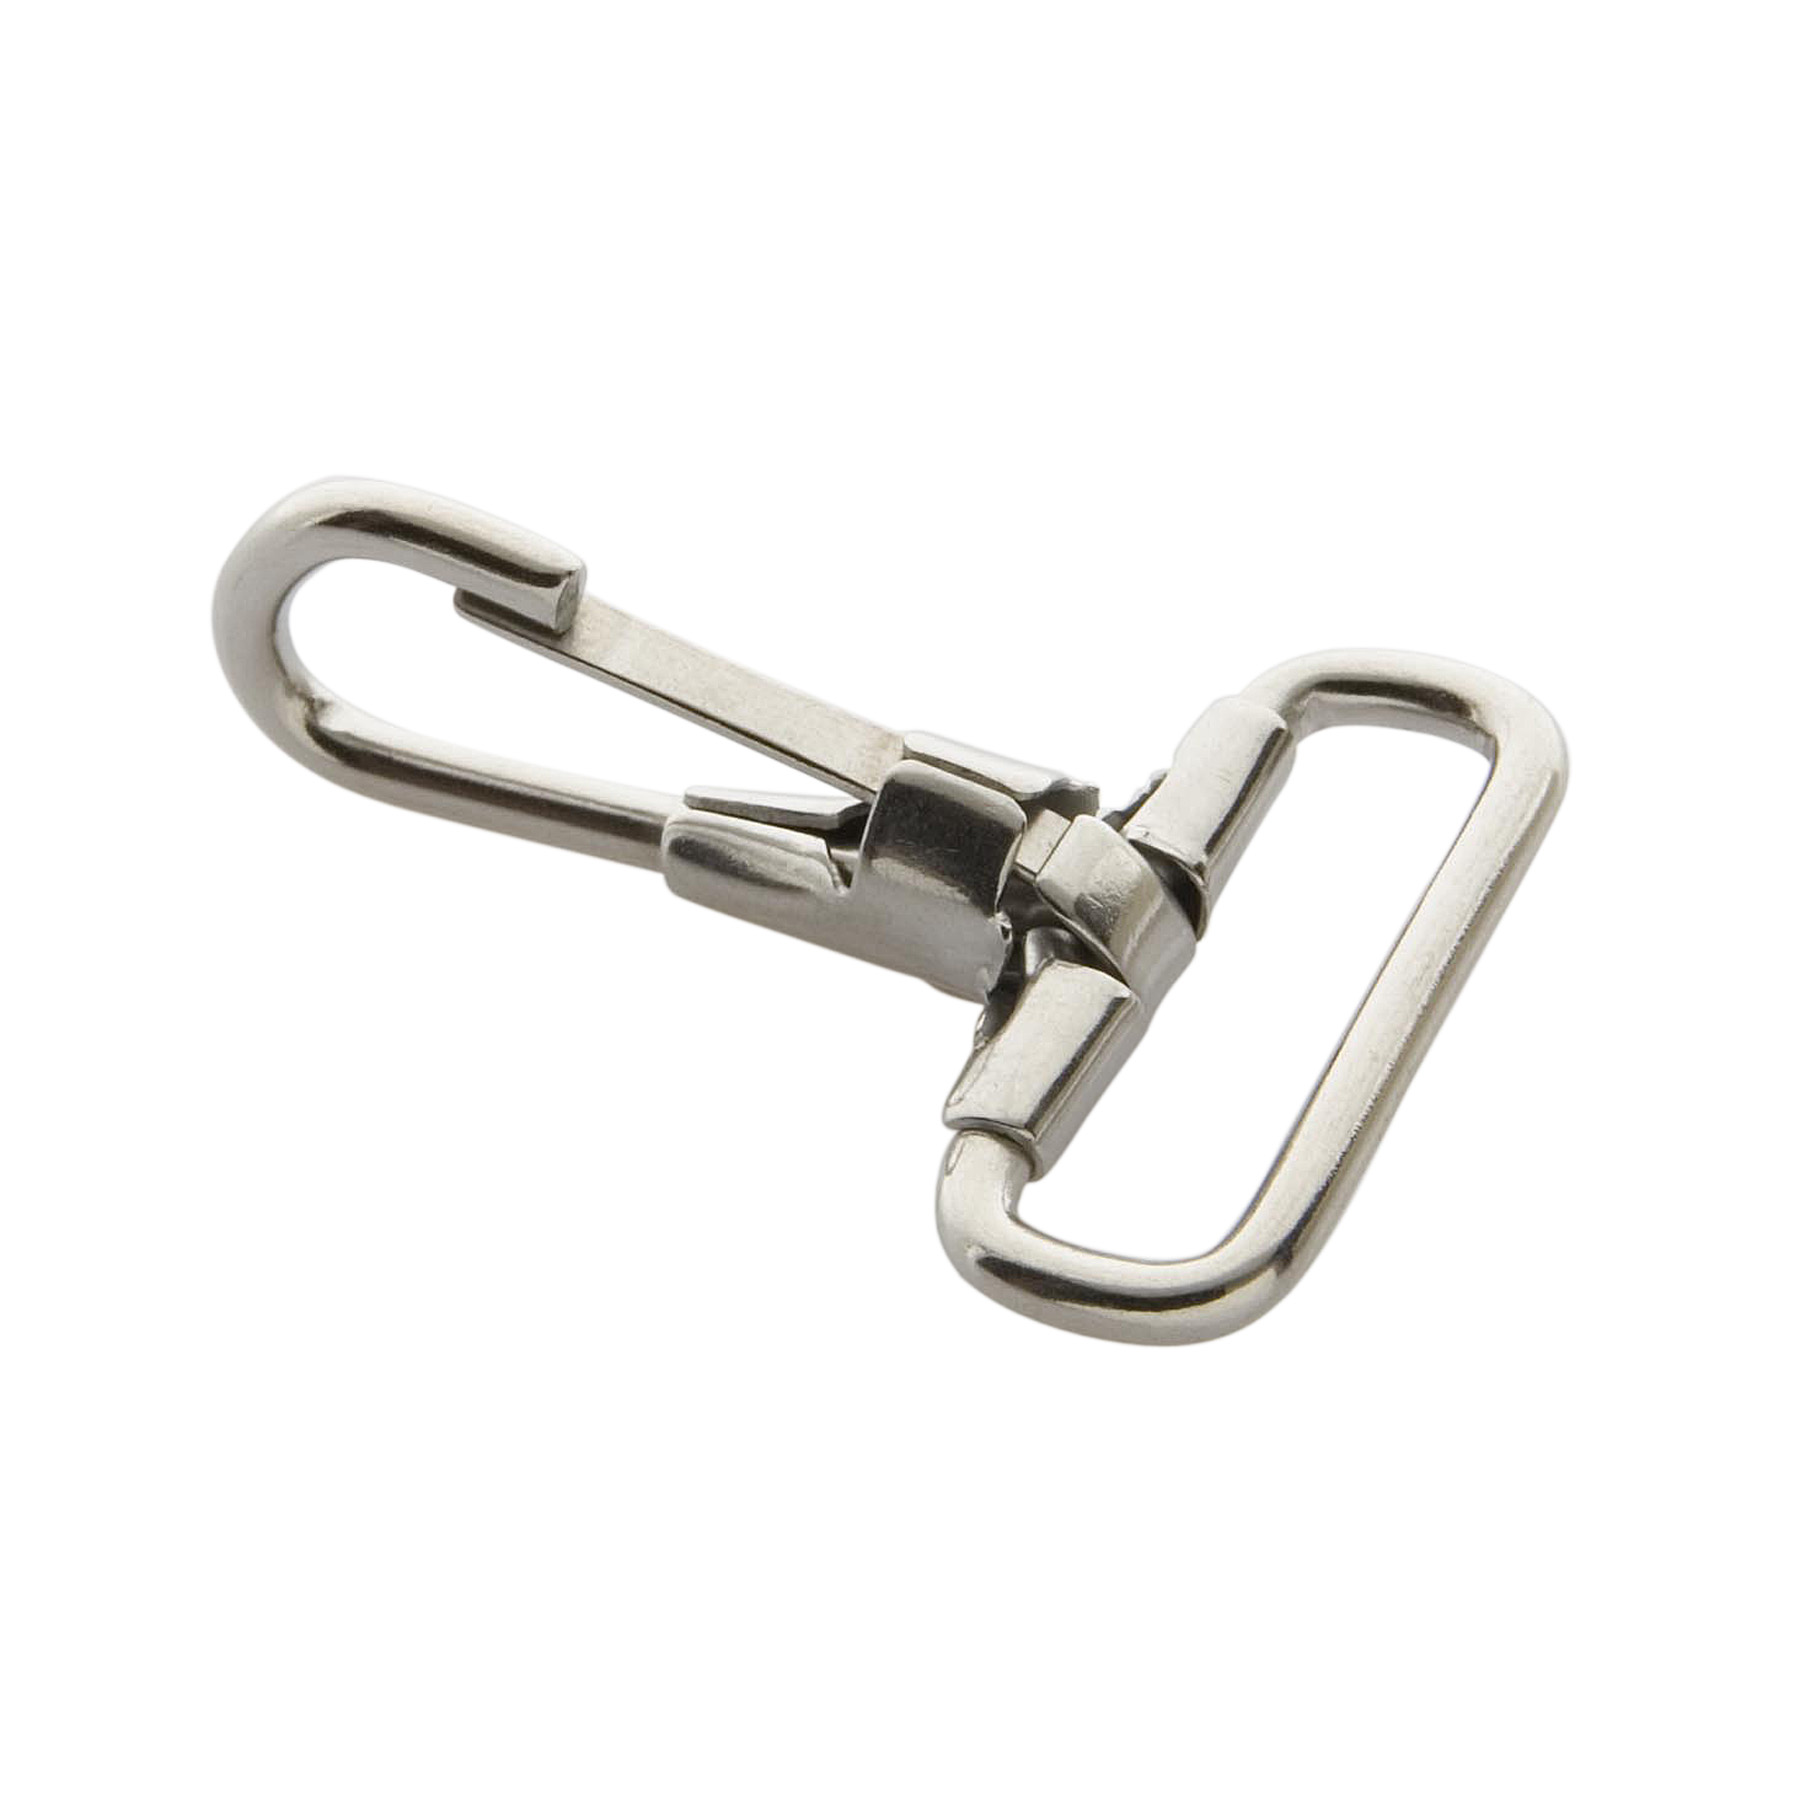 Max-Catch 13/0 Stainless Steel Circle Hooks